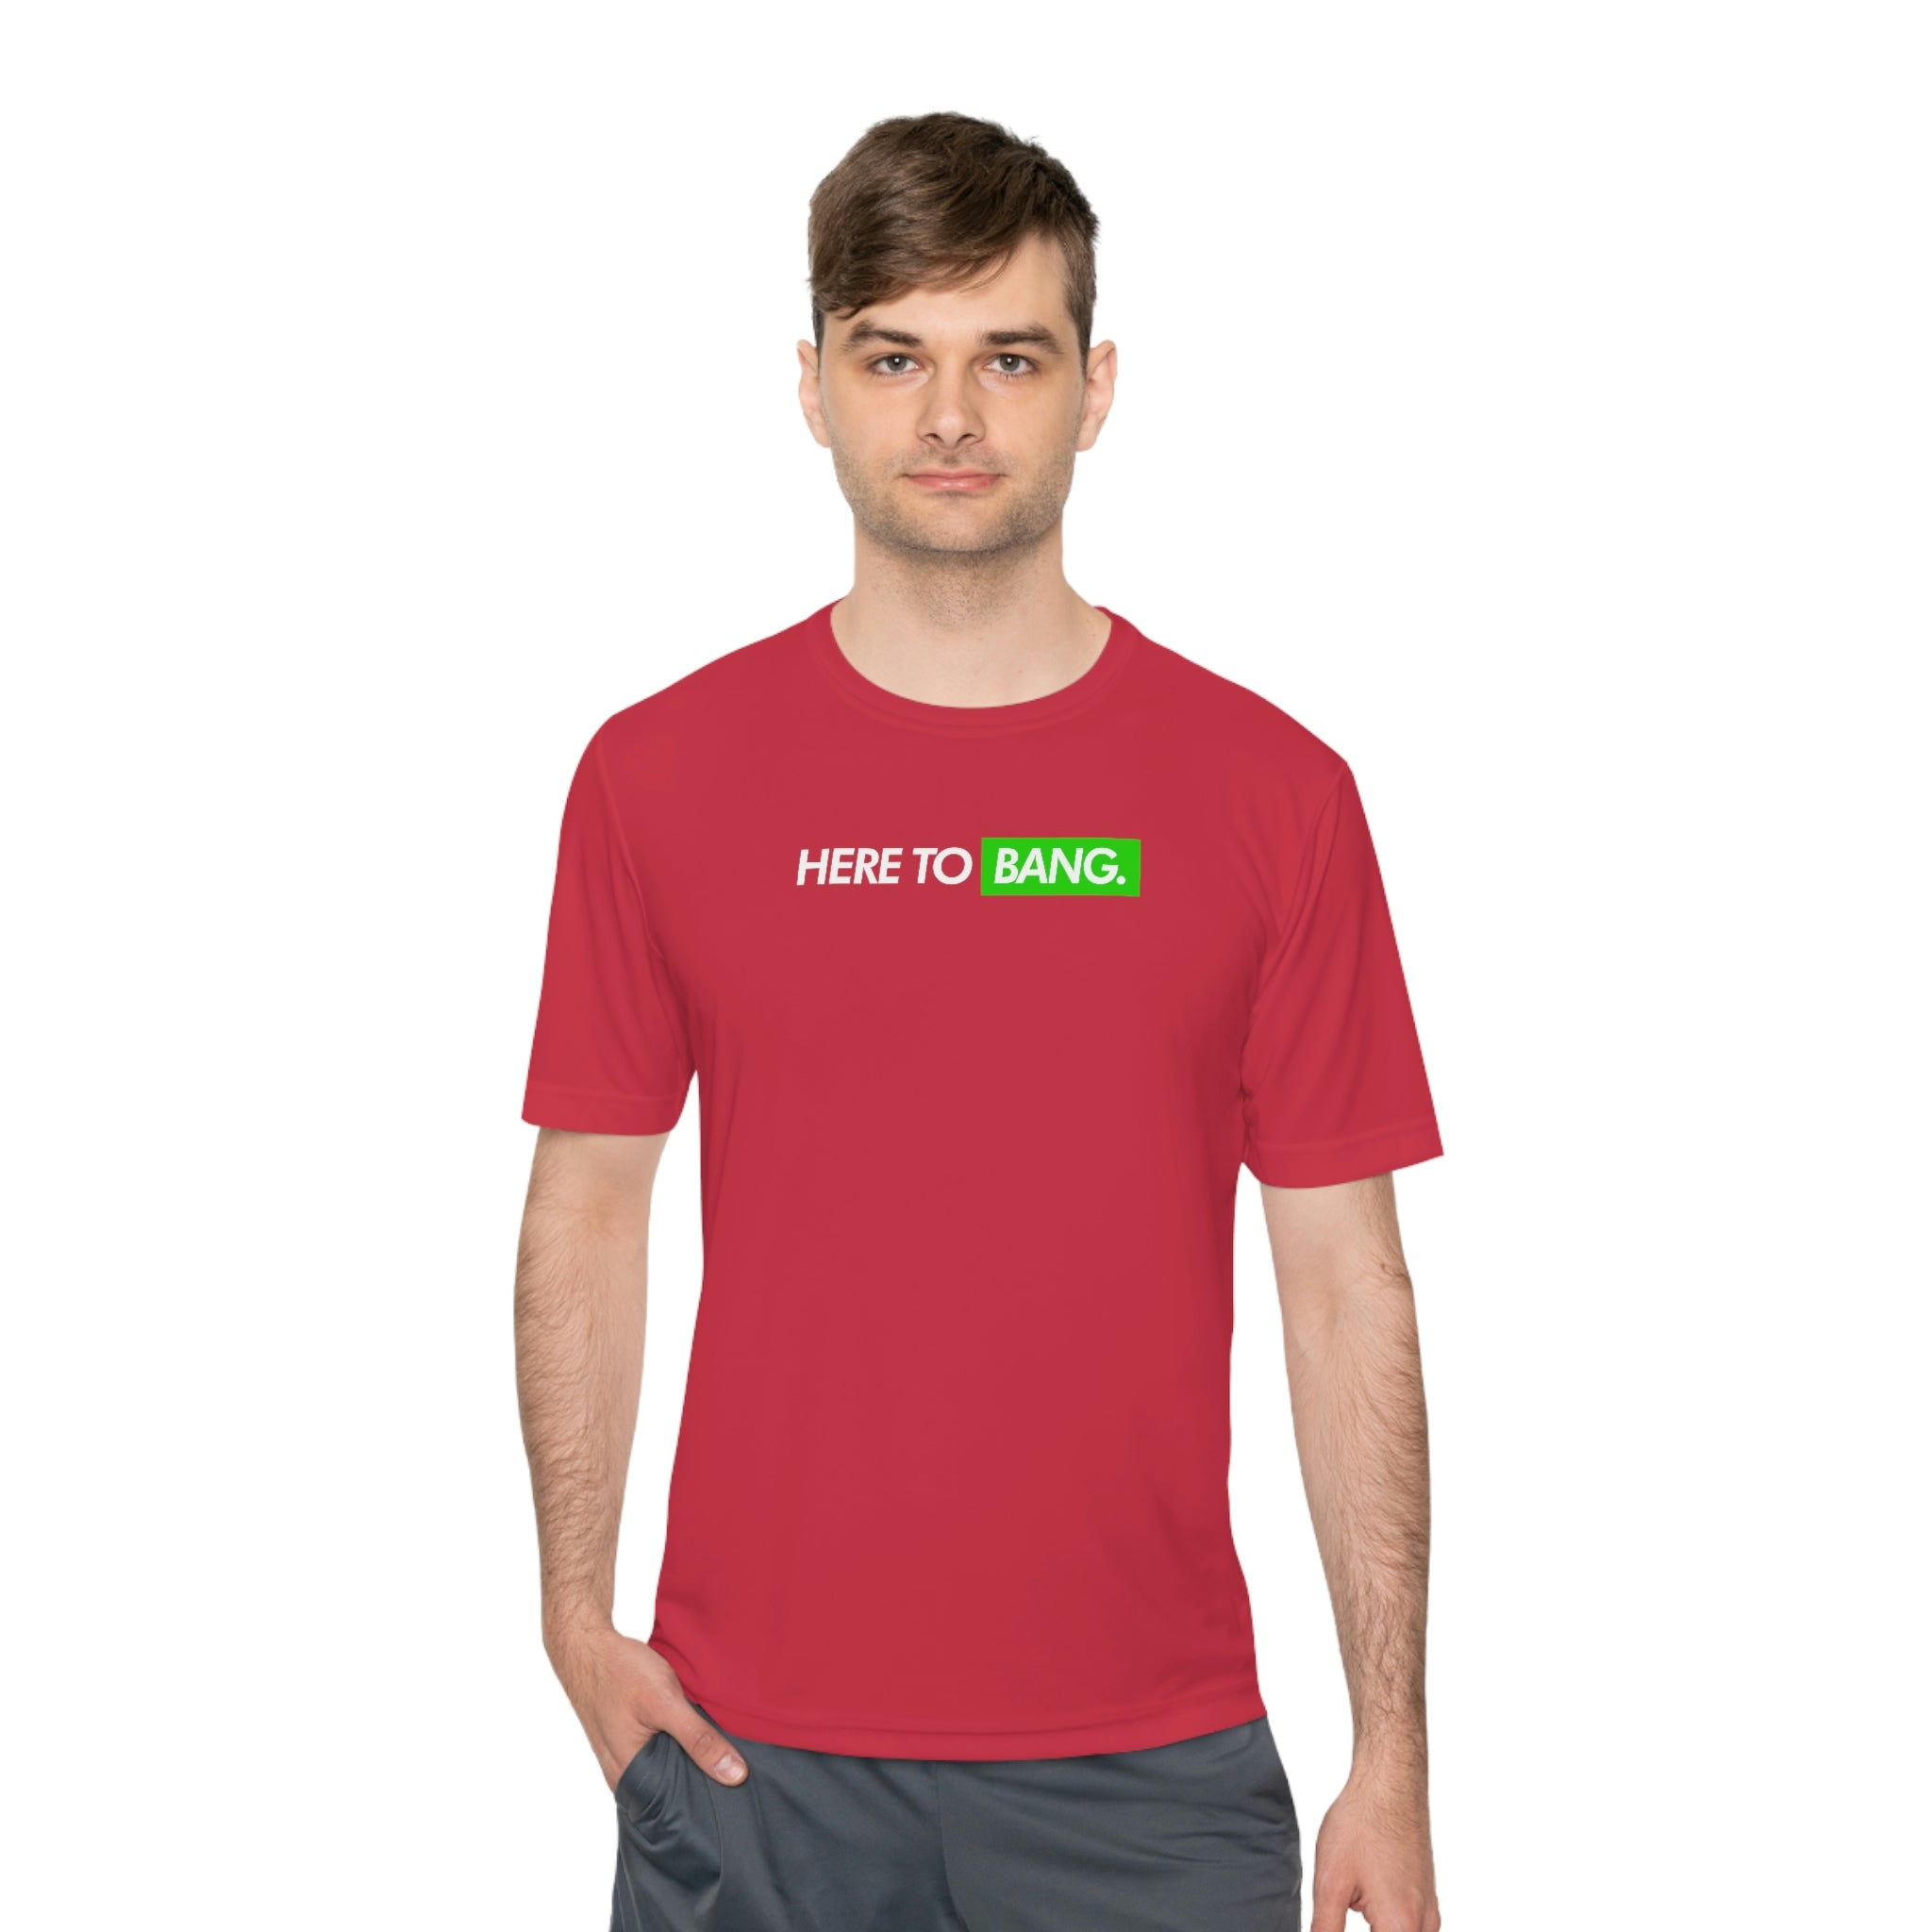 man wearing red here to bang men's athletic pickleball apparel shirt front view